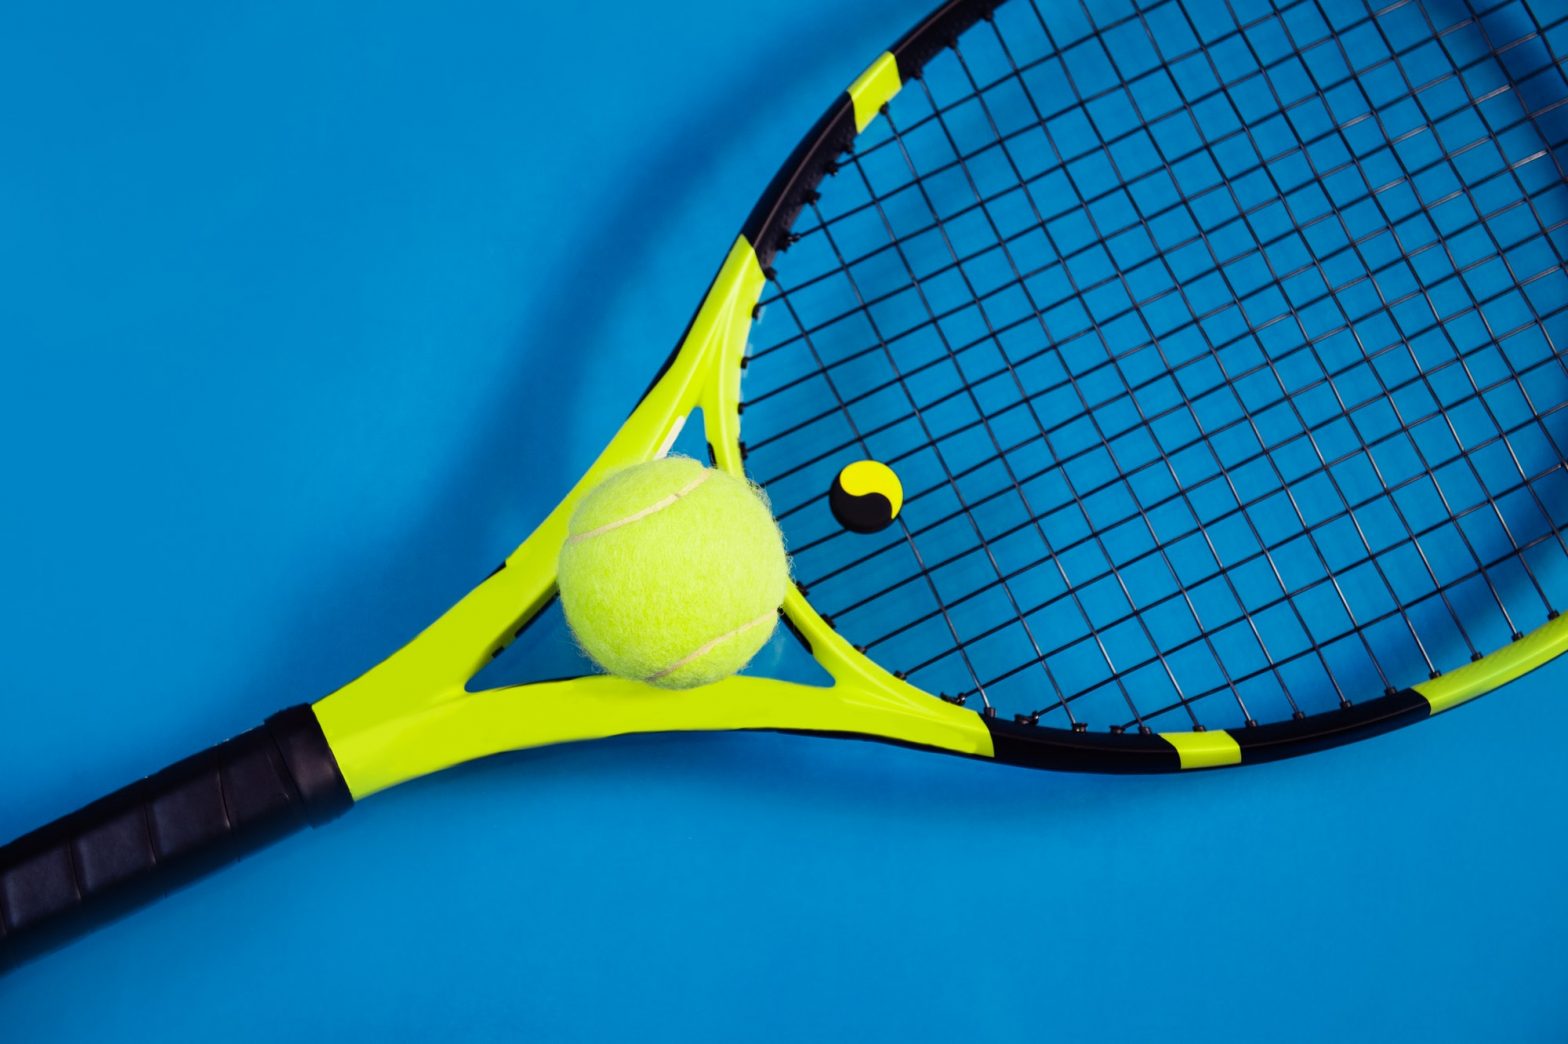 Tennis racket with a ball top view copy space